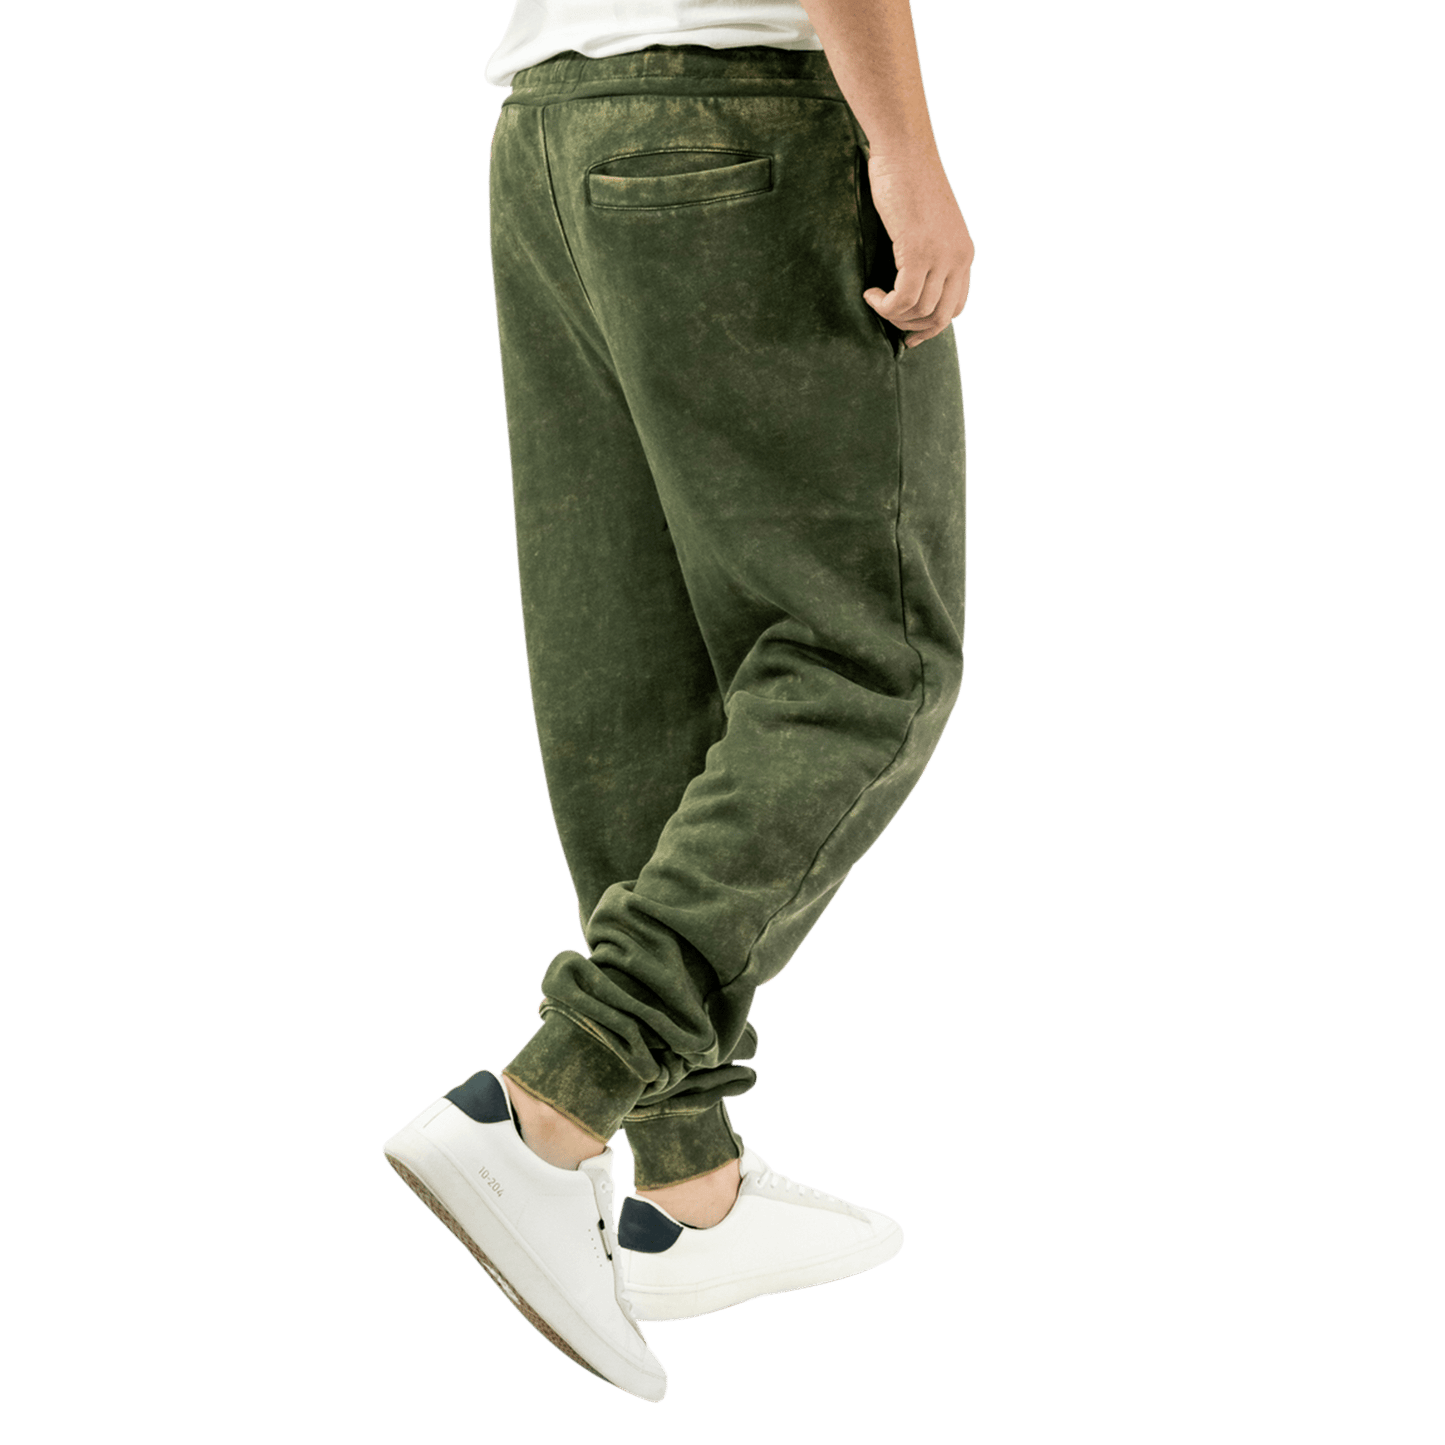 Get Froffed 3 Fleece Trackies Pants Frothies